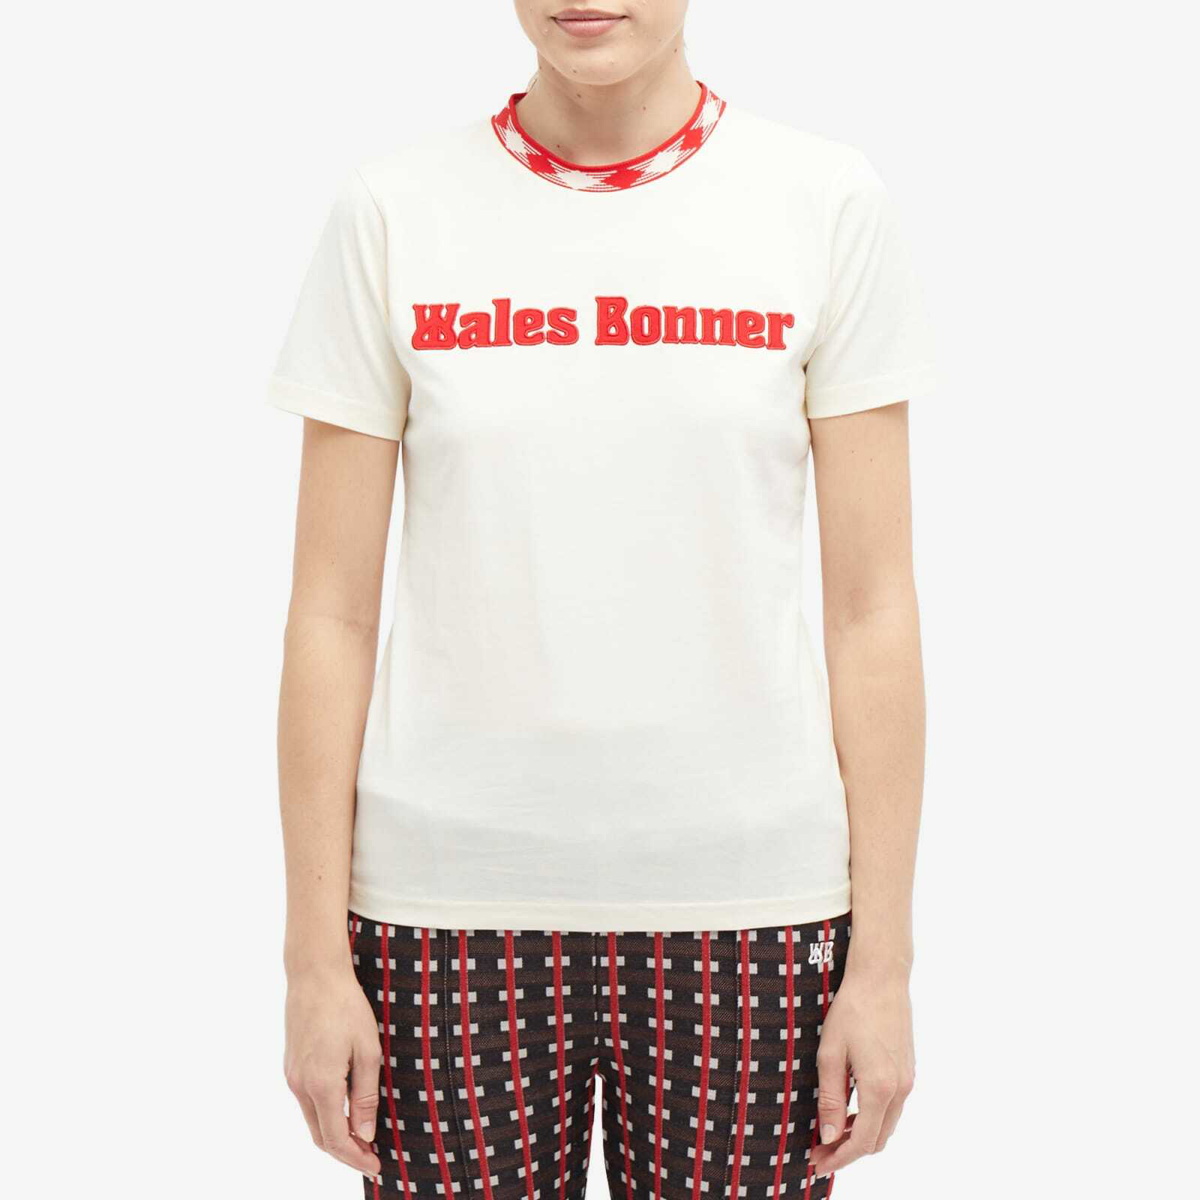 WALES BONNER: t-shirt for woman - Ivory